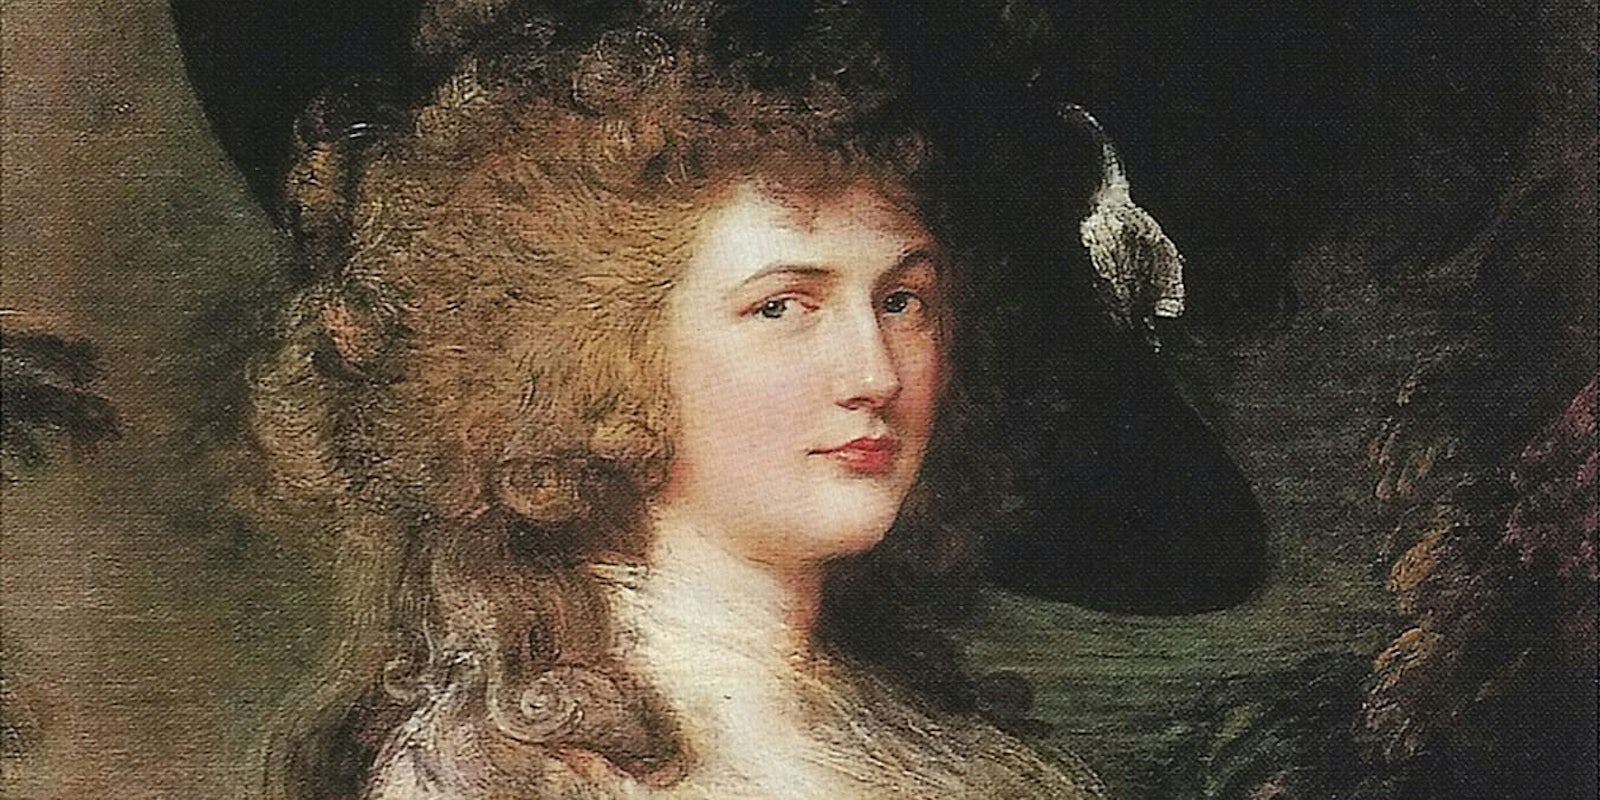 A new Instagram account for Gucci Beauty features classical portraits of women.